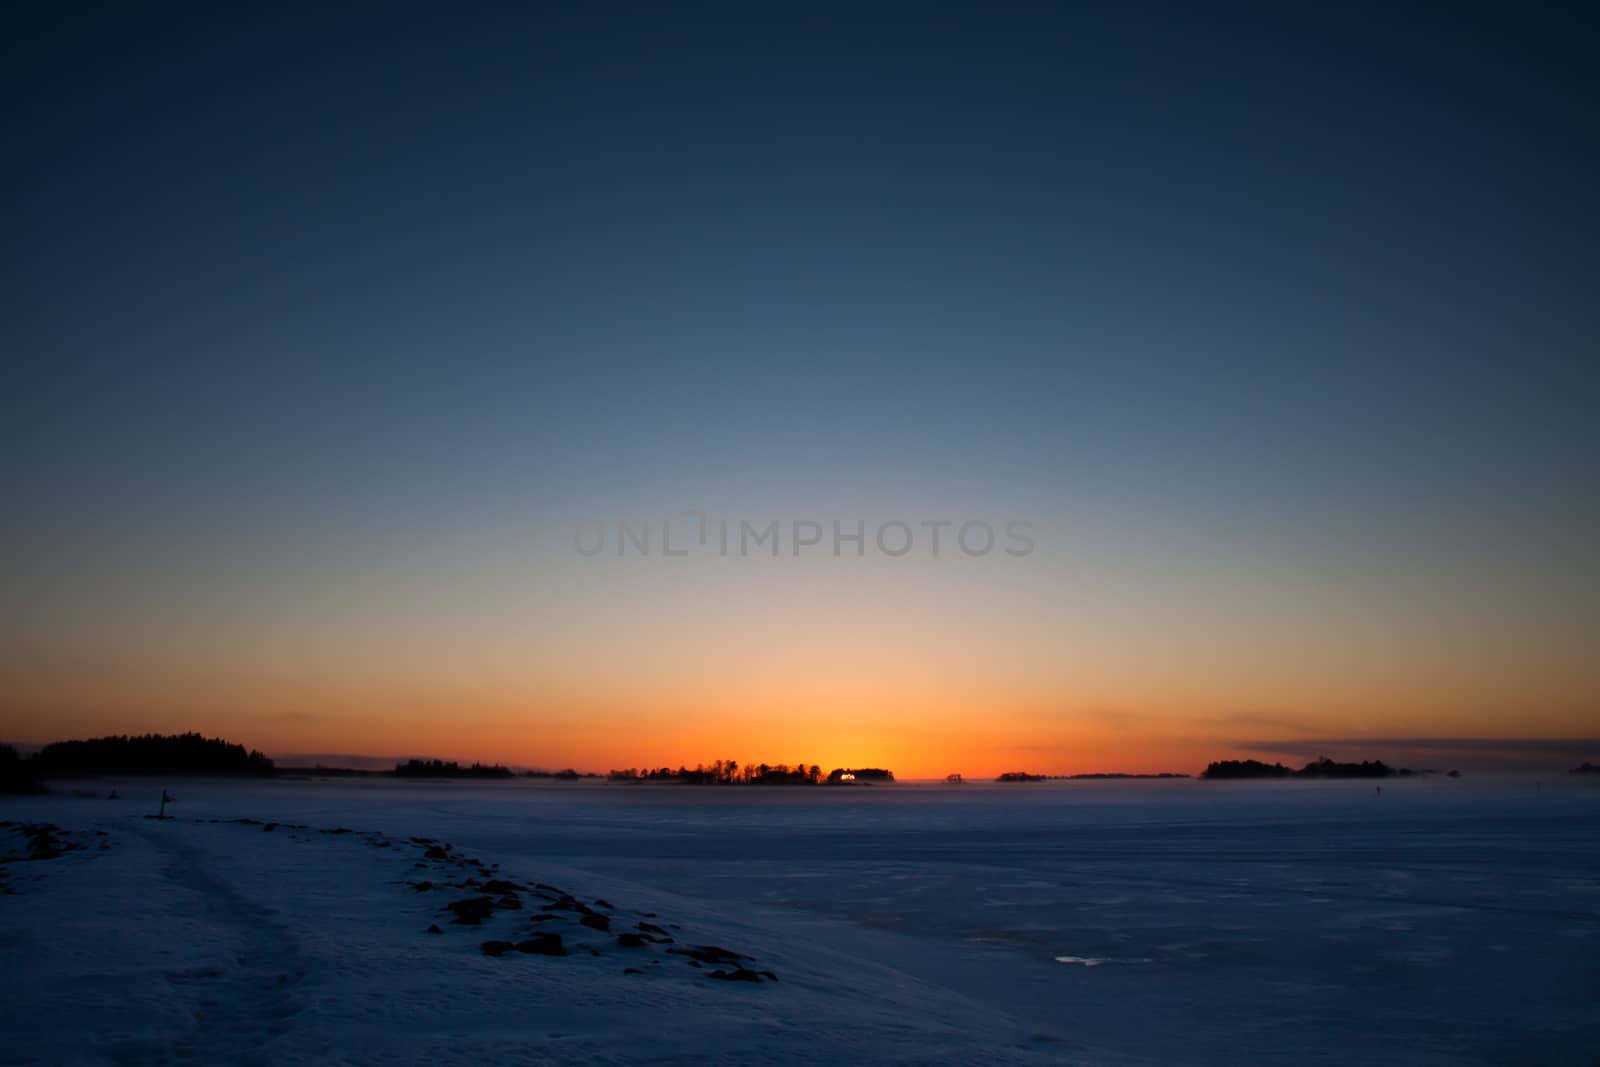 Sunset landscape in cold winter weather. Frozen sea and islands.